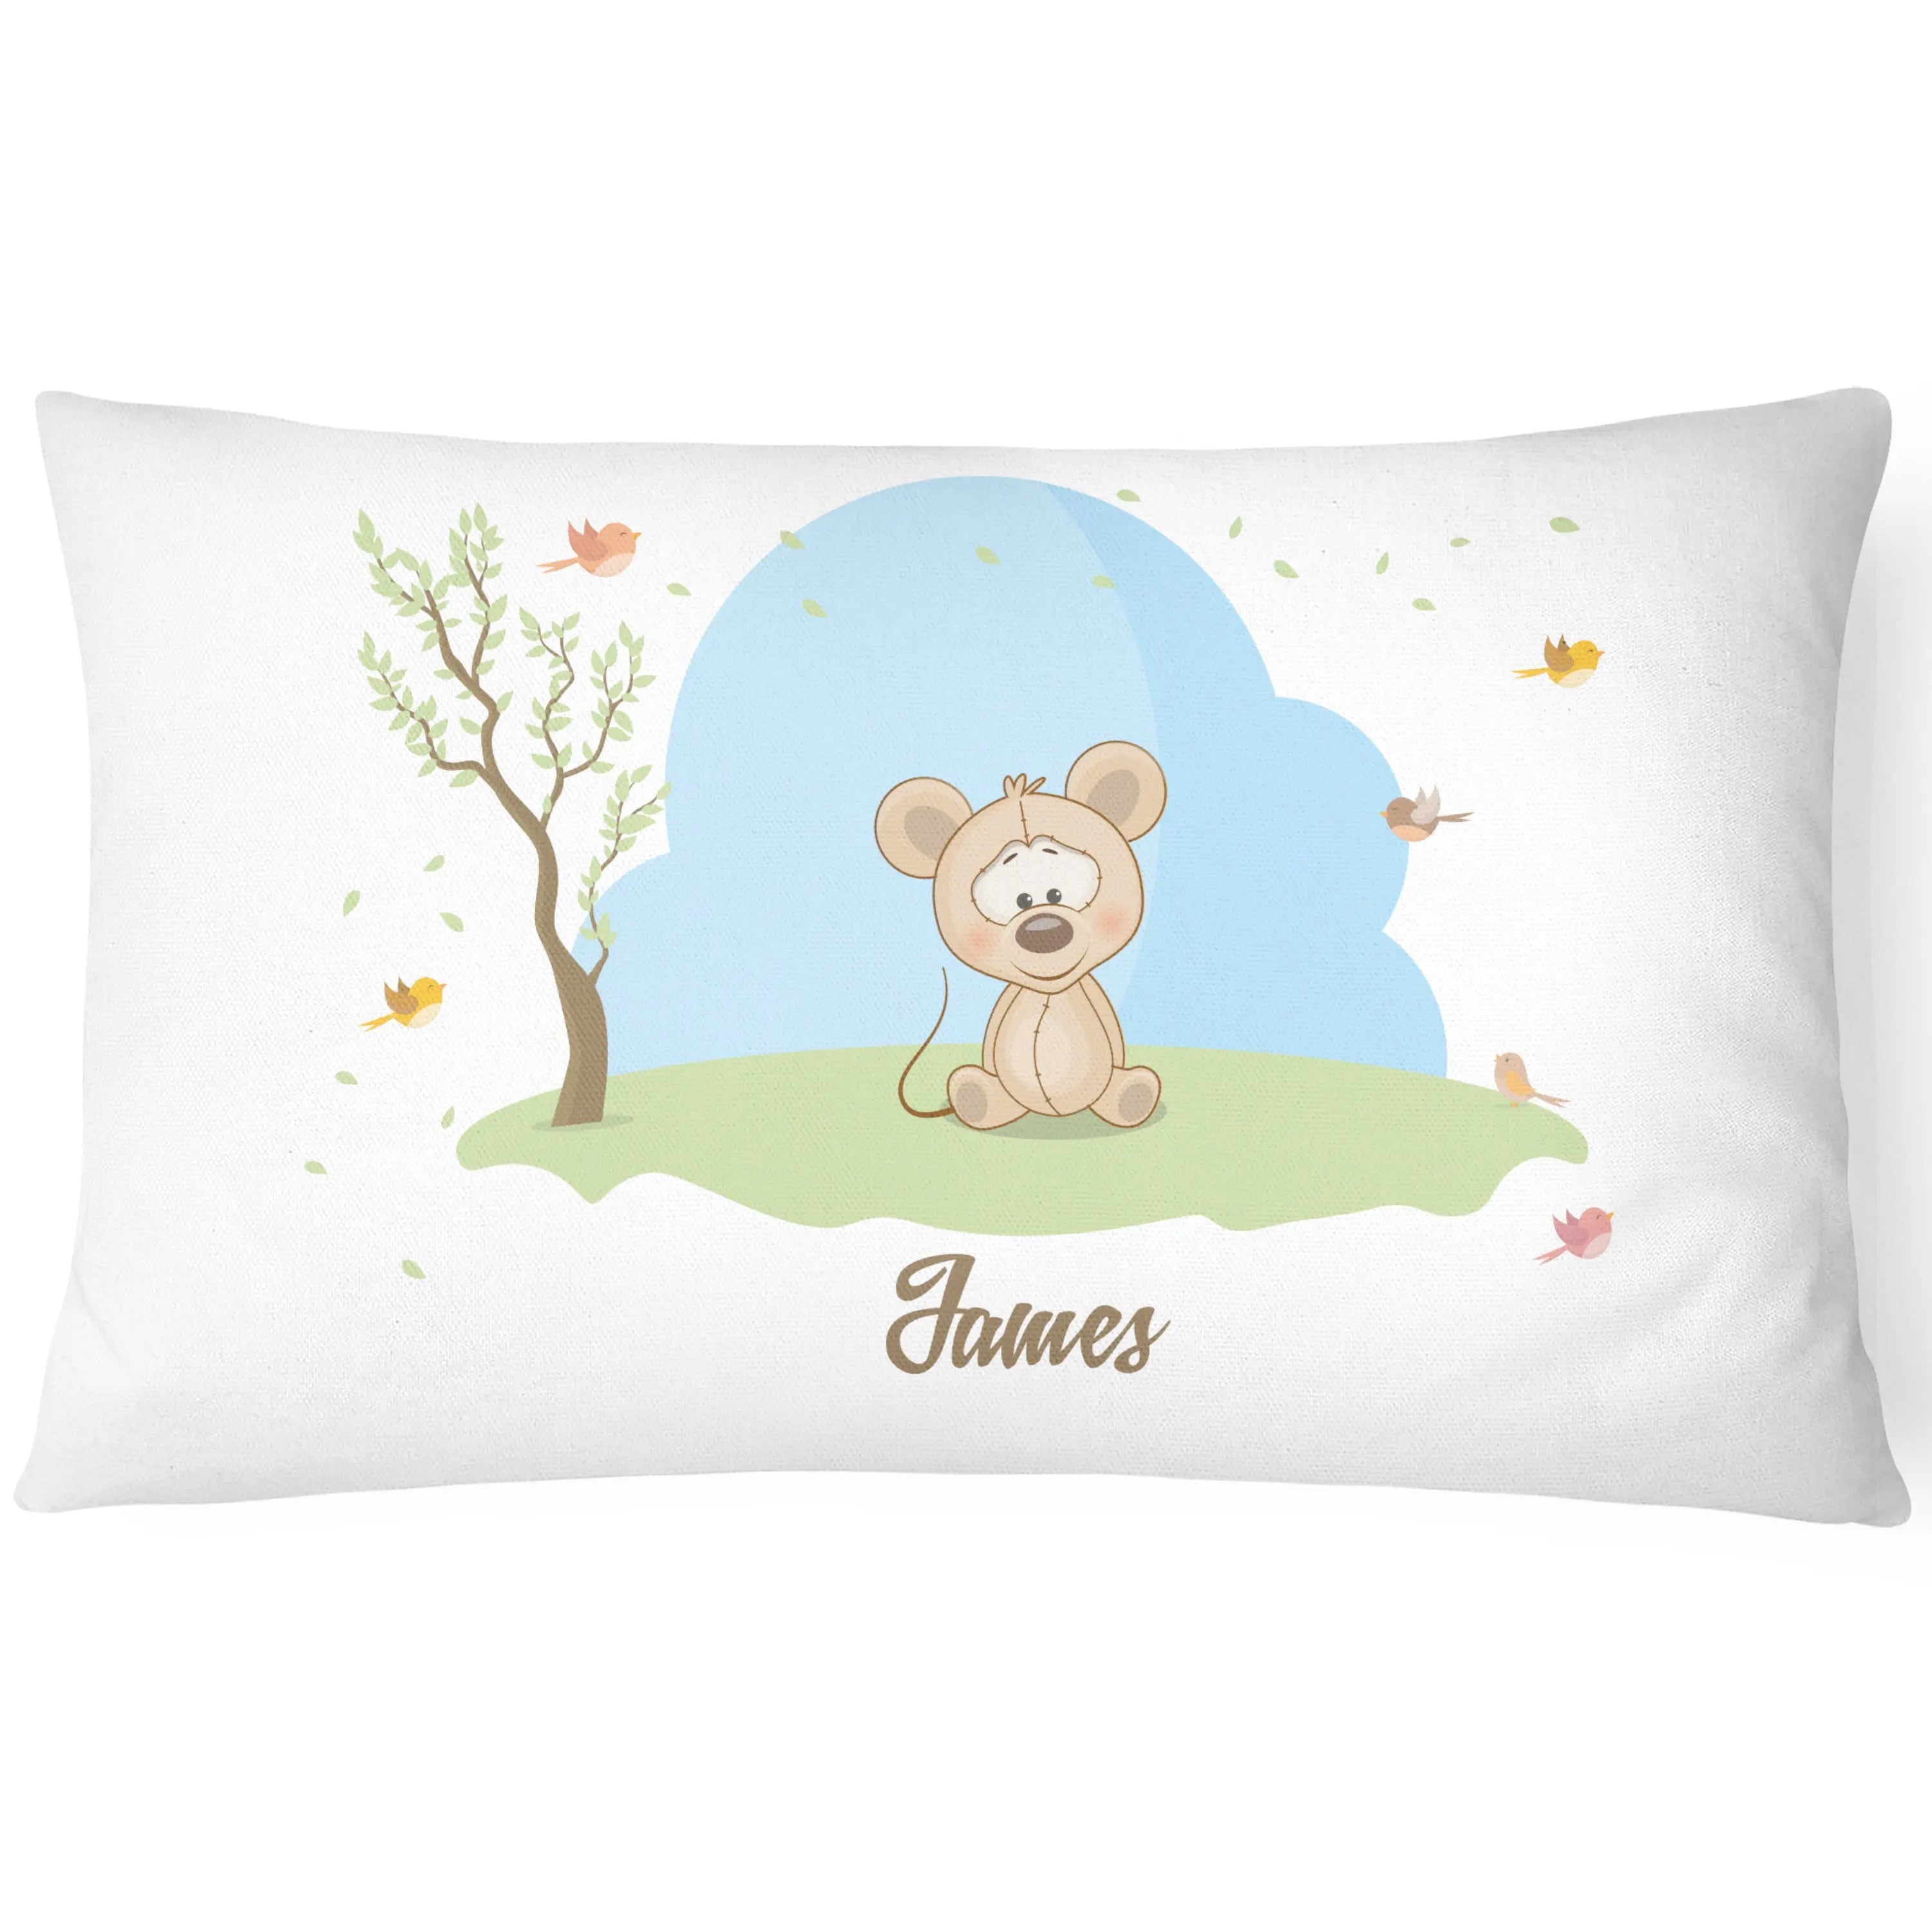 Personalised Children's Pillowcase Cute Animal - Winsome - CushionPop